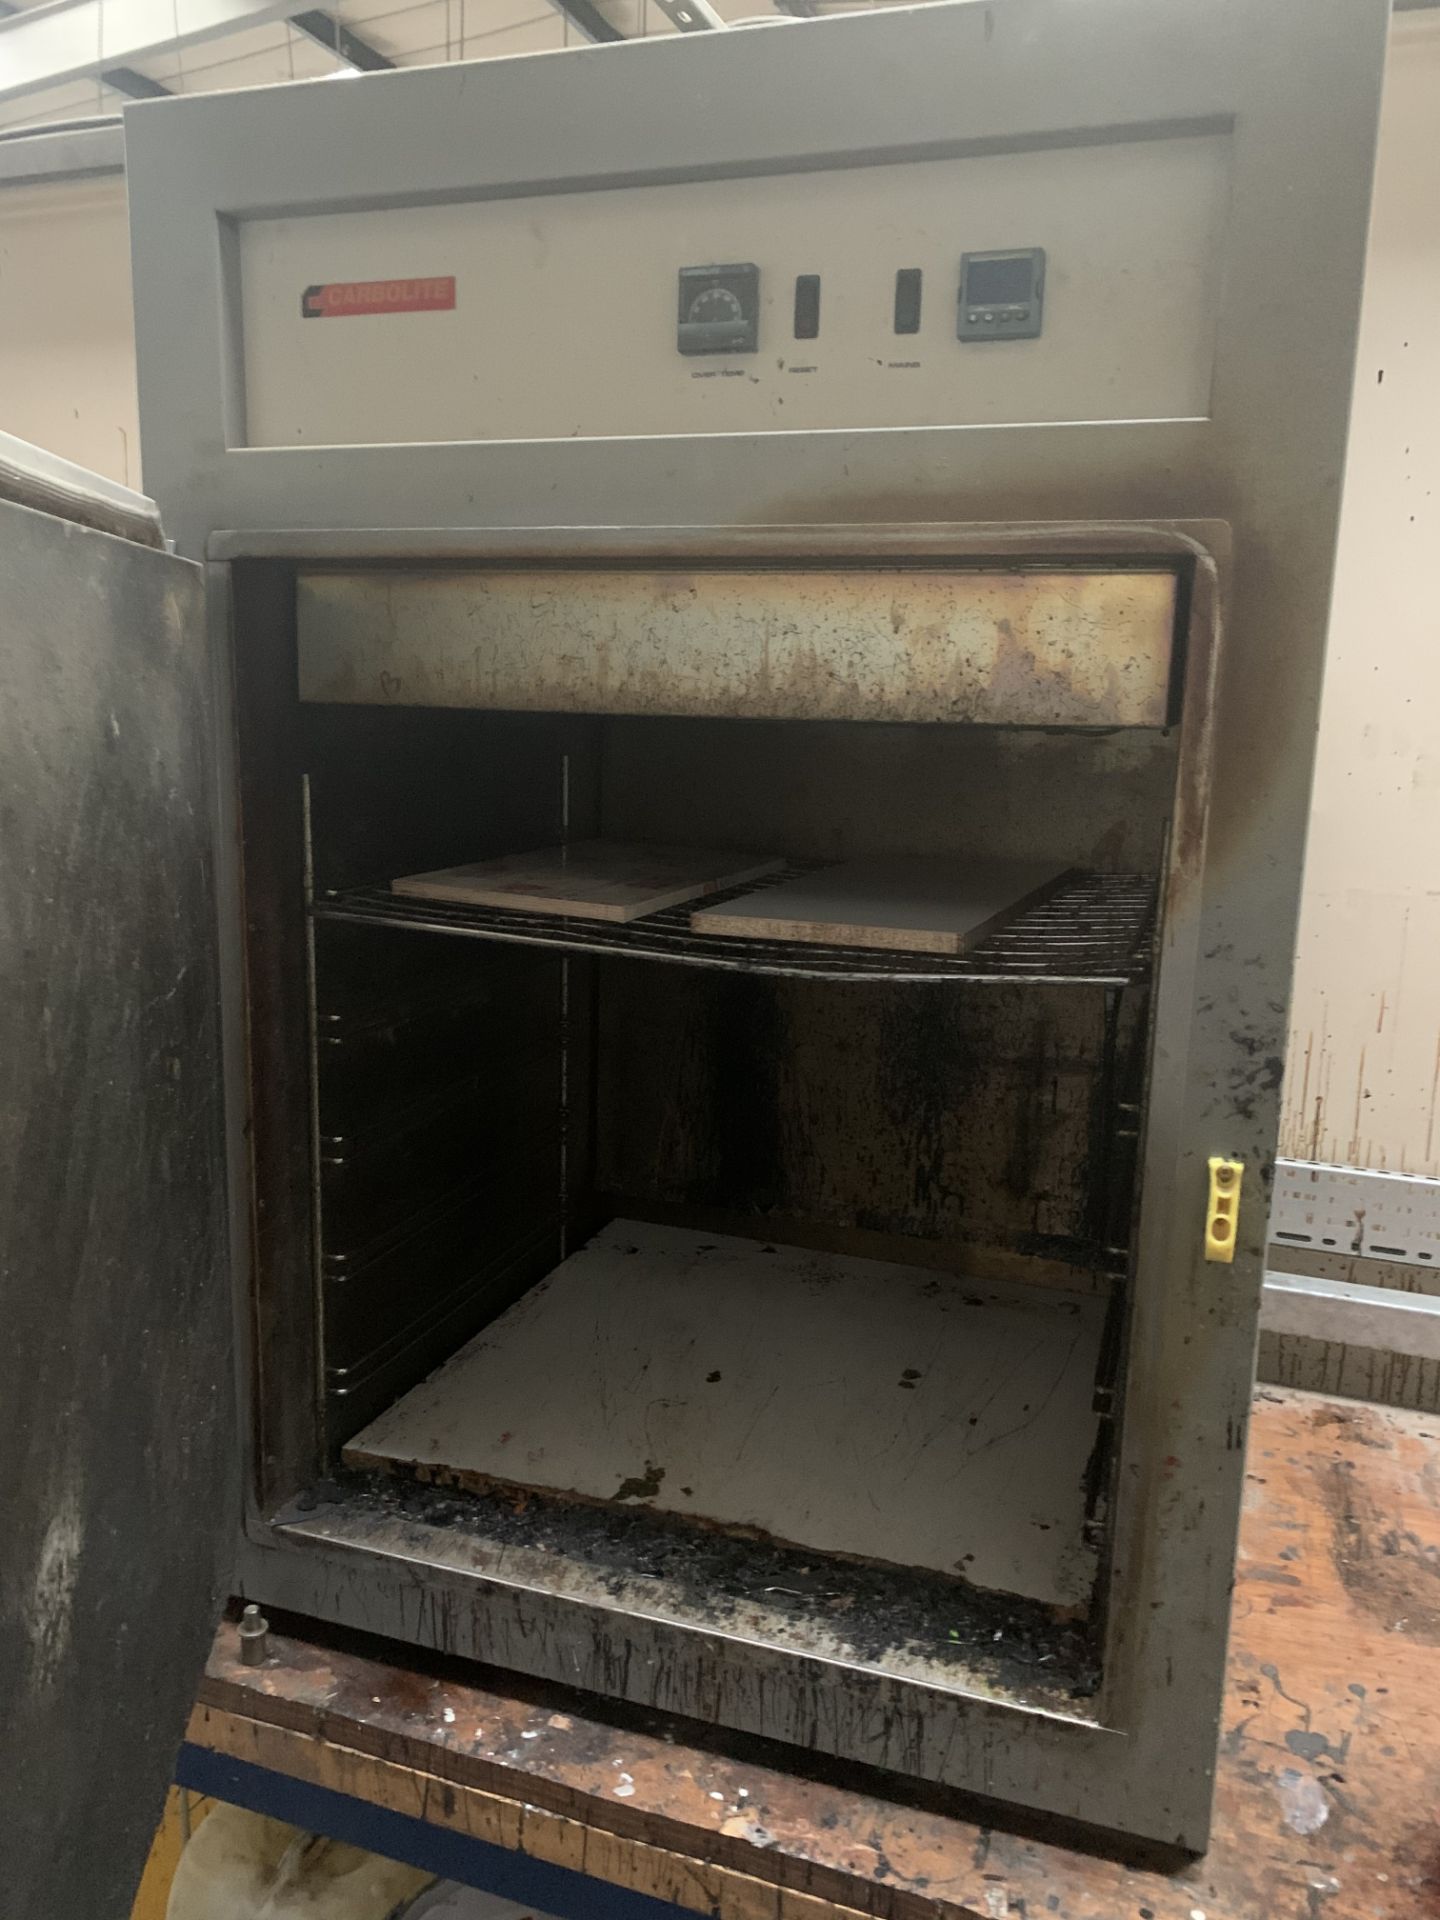 Car Bolits electric BATCH OVEN 660 x 660 x 710mm - Image 2 of 2